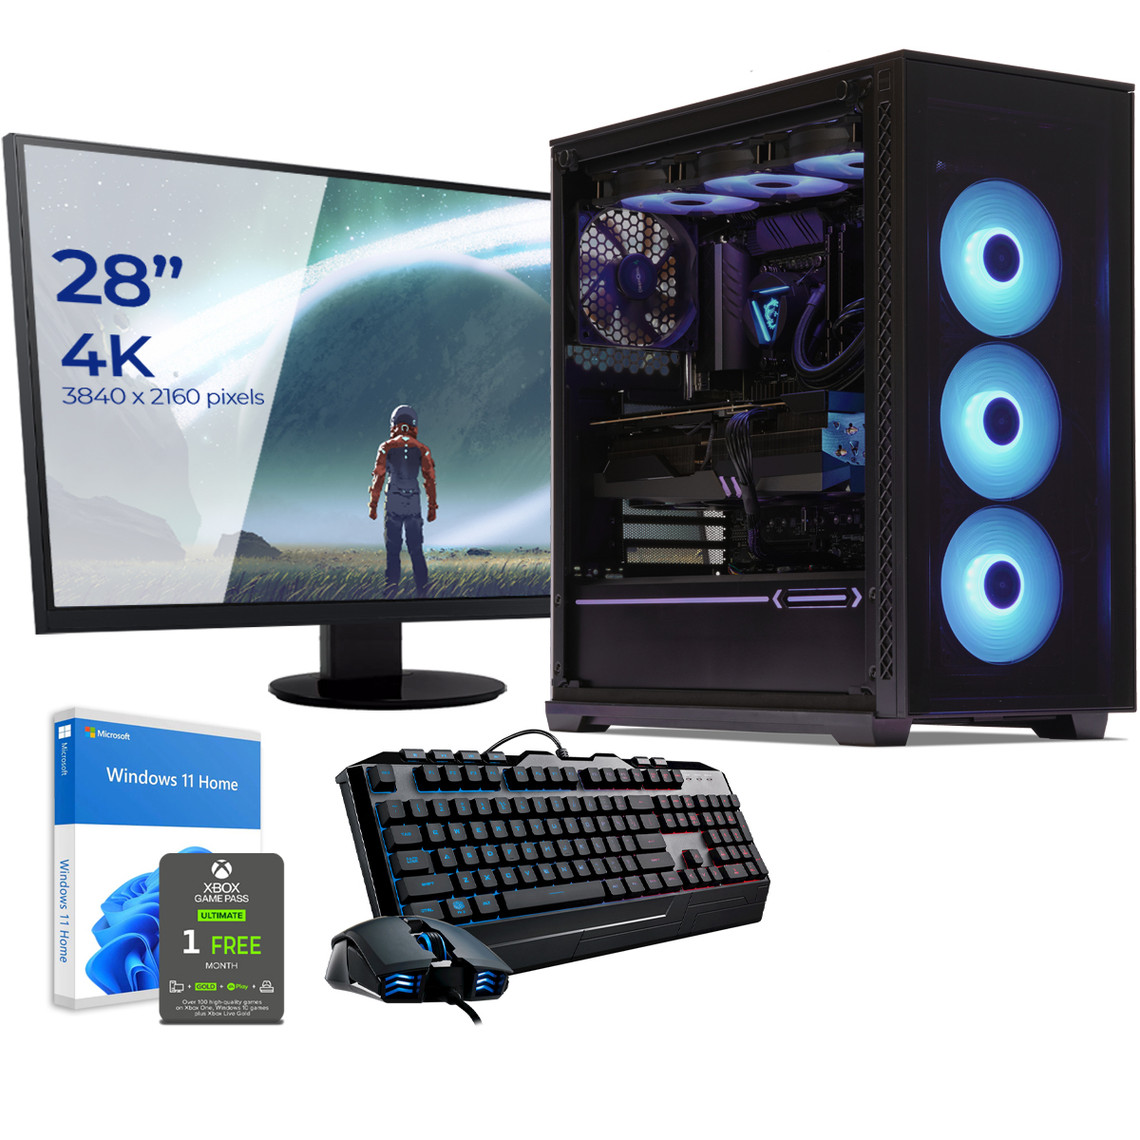 PC Fixe Gamer Sedatech Pack PC Gamer Watercooling • Intel i7-13700KF • RTX4080 • 32Go DDR5 • 1To SSD M.2 • 3To HDD • Windows 11 • Moniteur 28"